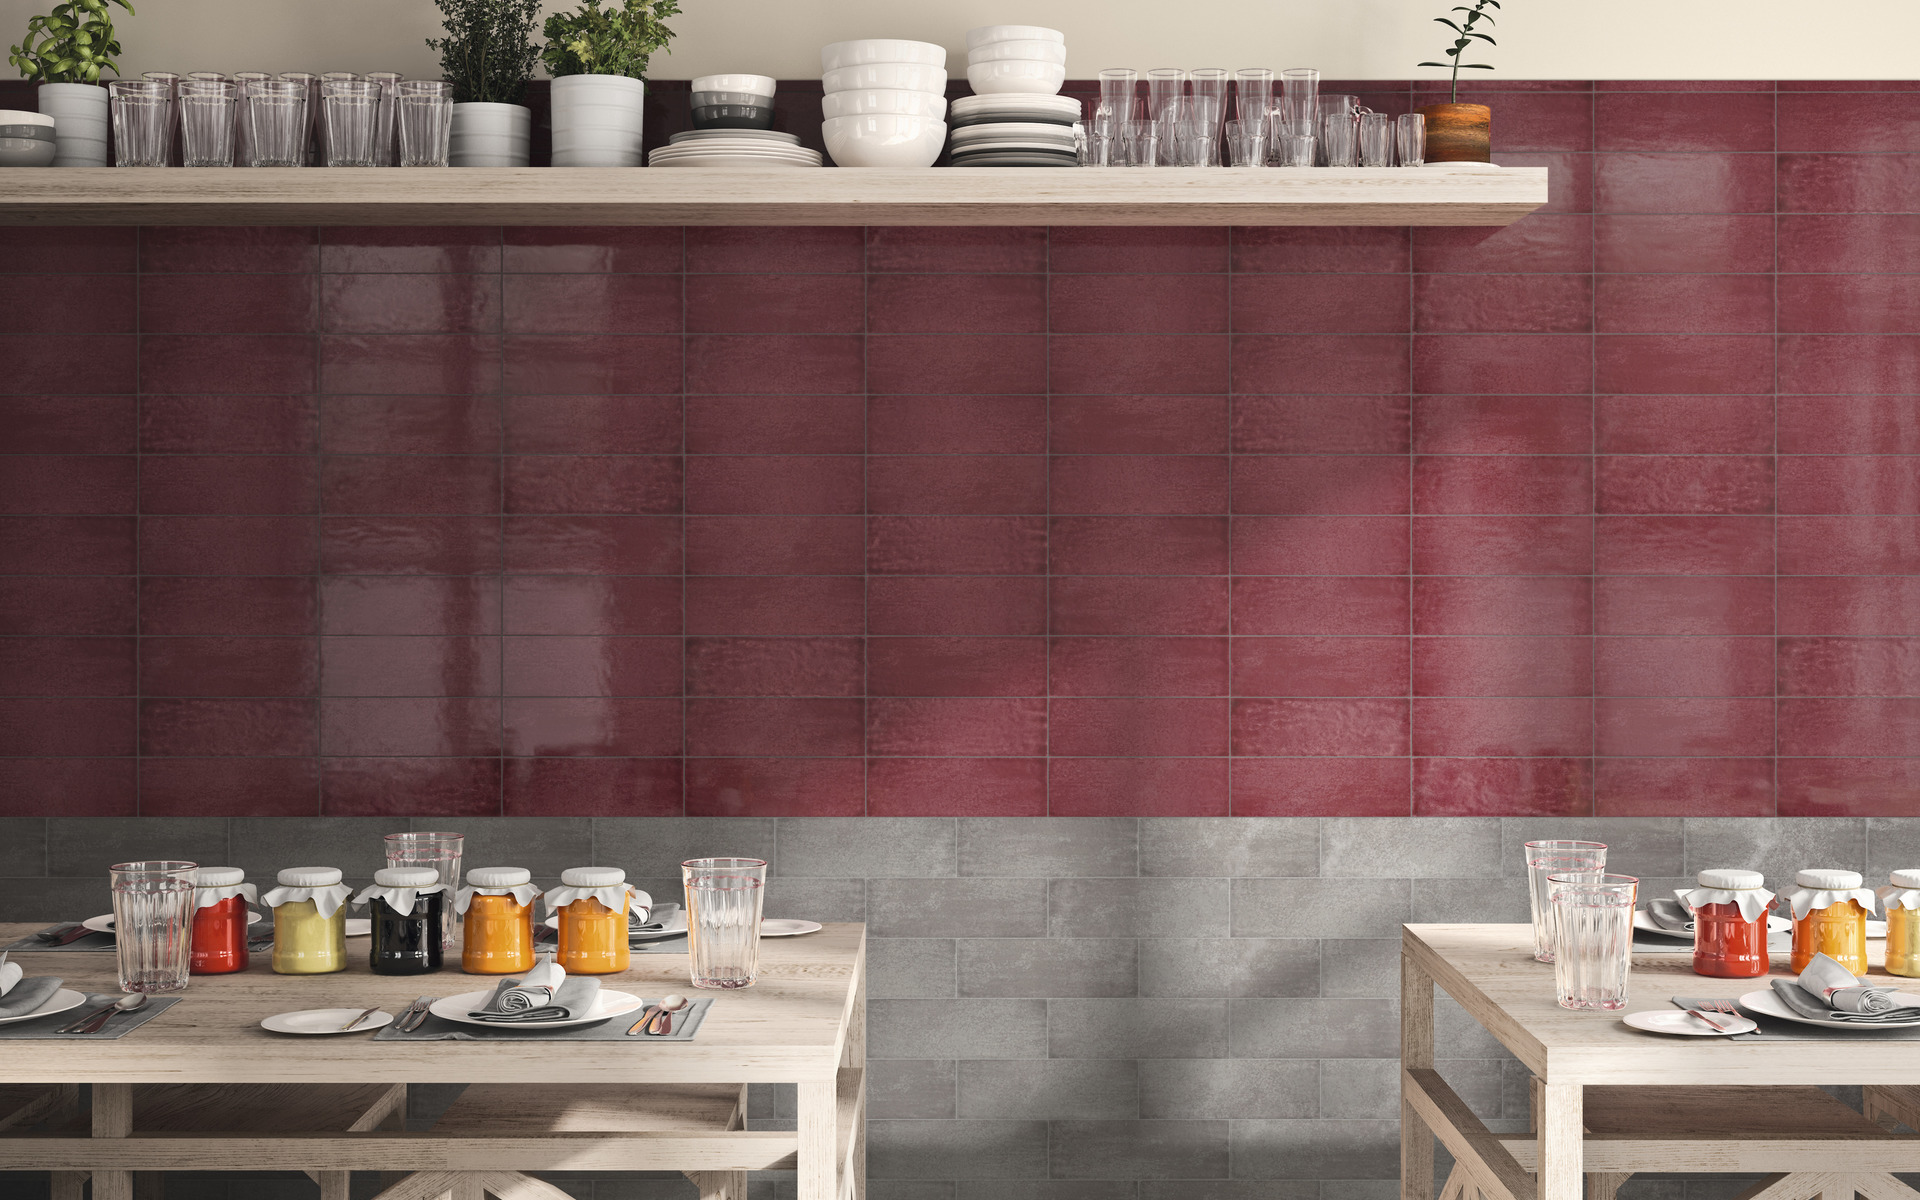 Wall tiles in restaurant in color block sections, grey and burgundy.